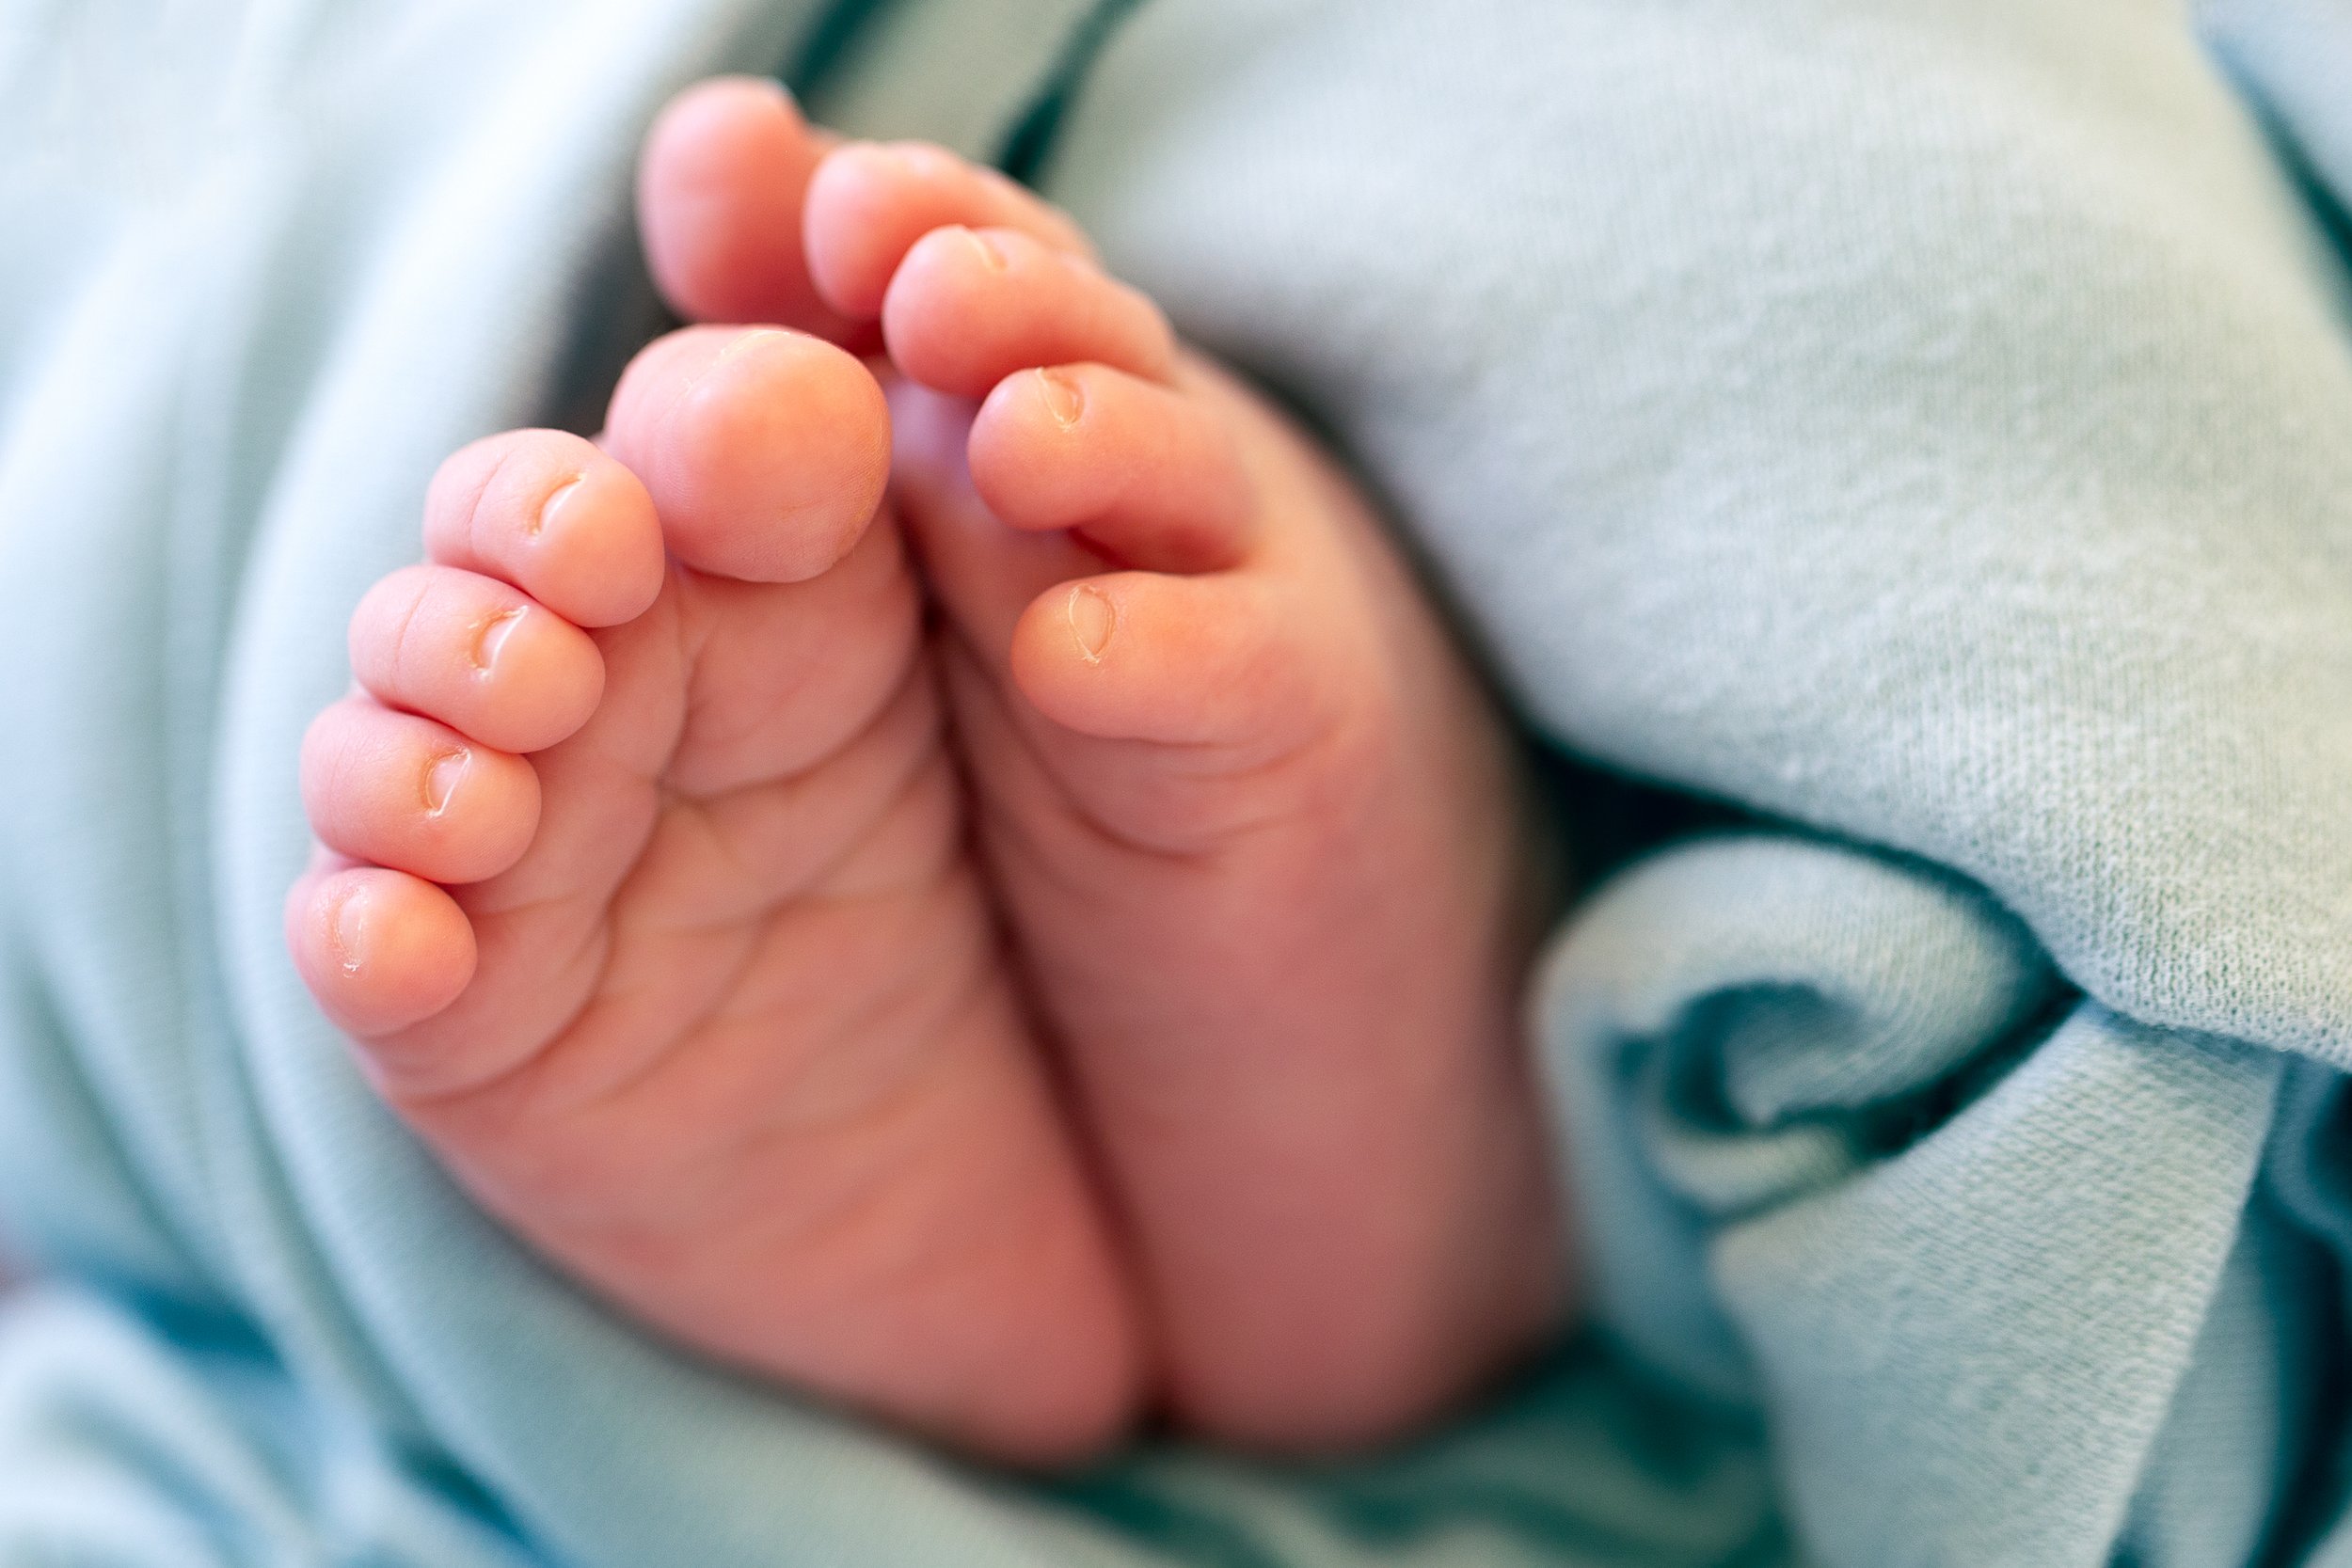 tiny newborn baby feet with curled toes